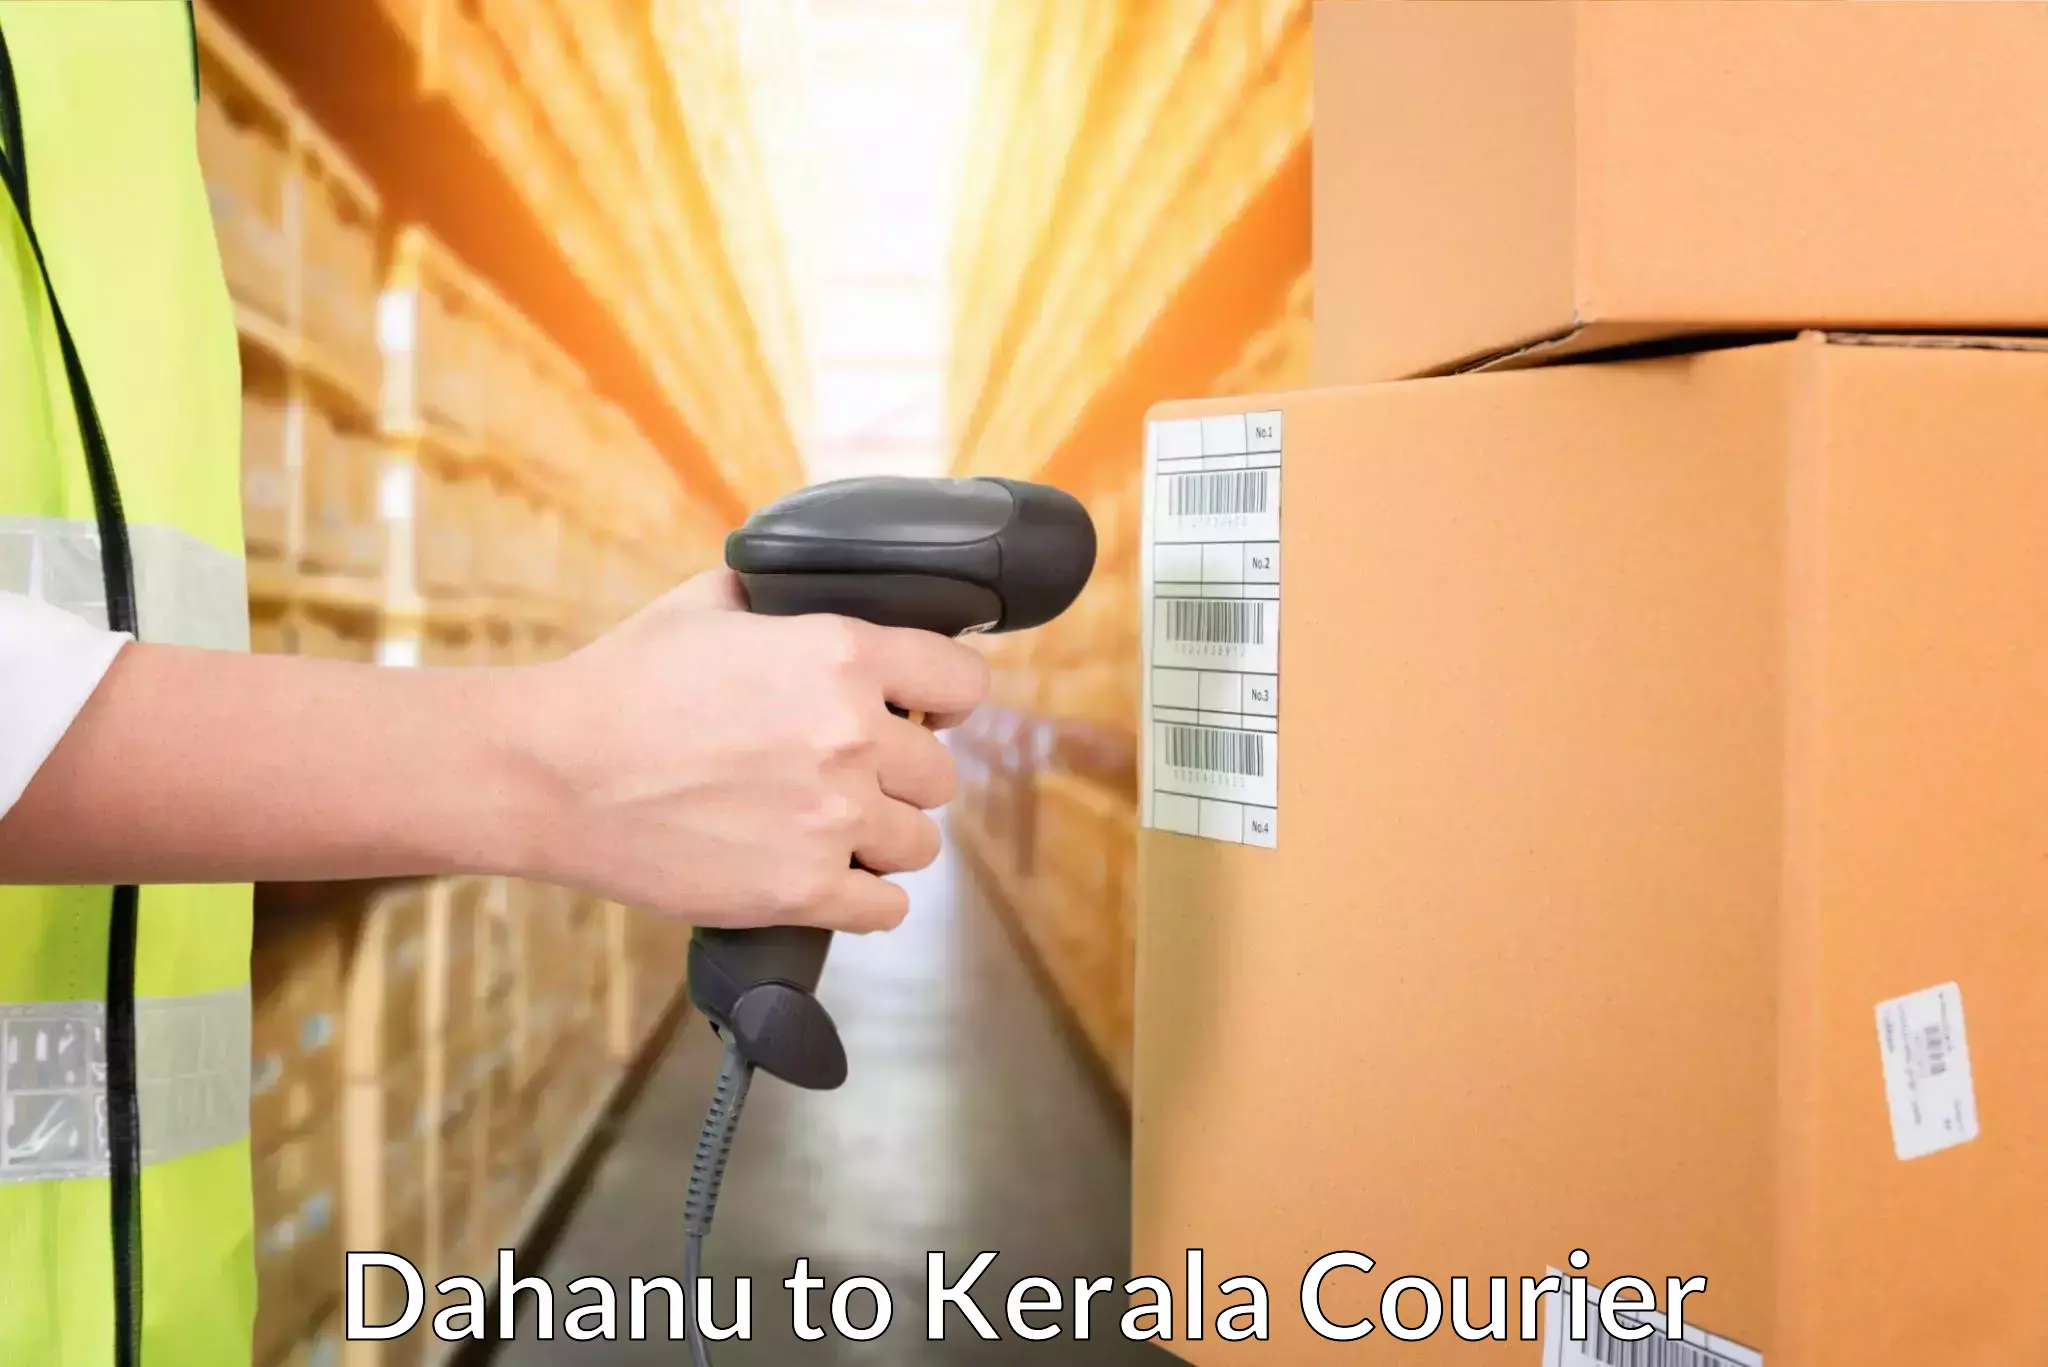 Personal parcel delivery Dahanu to Cochin Port Kochi